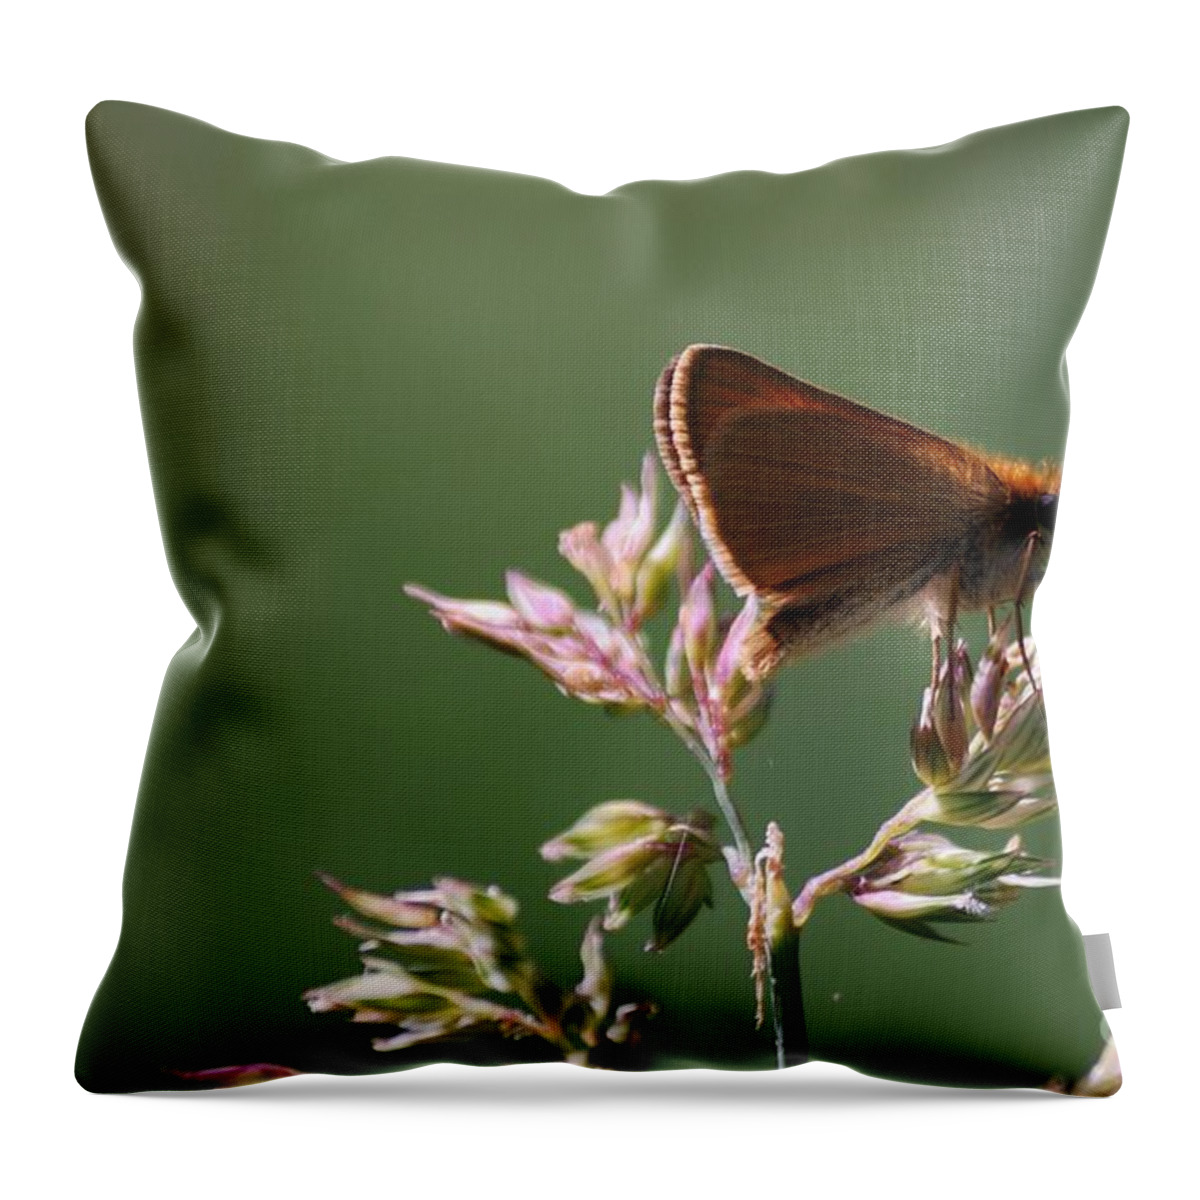 Butterfly Throw Pillow featuring the photograph European Skipper by Randy Bodkins